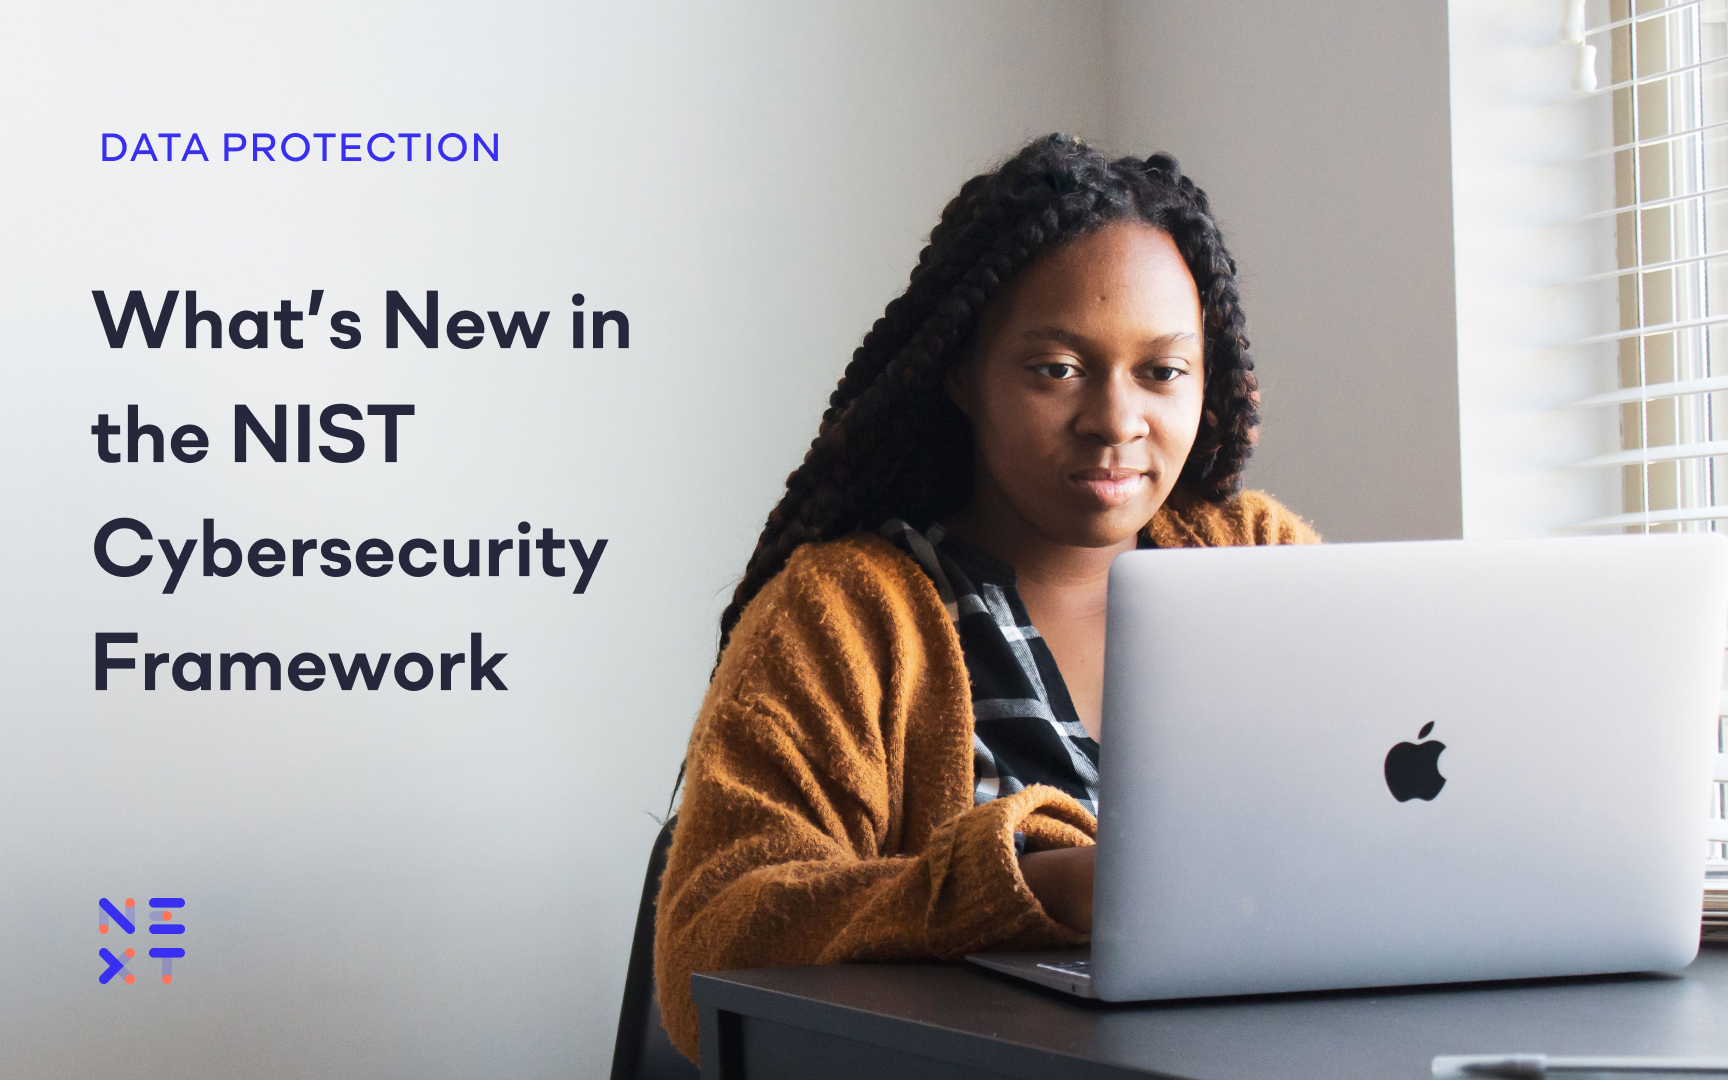 What’s New in the NIST Cybersecurity Framework